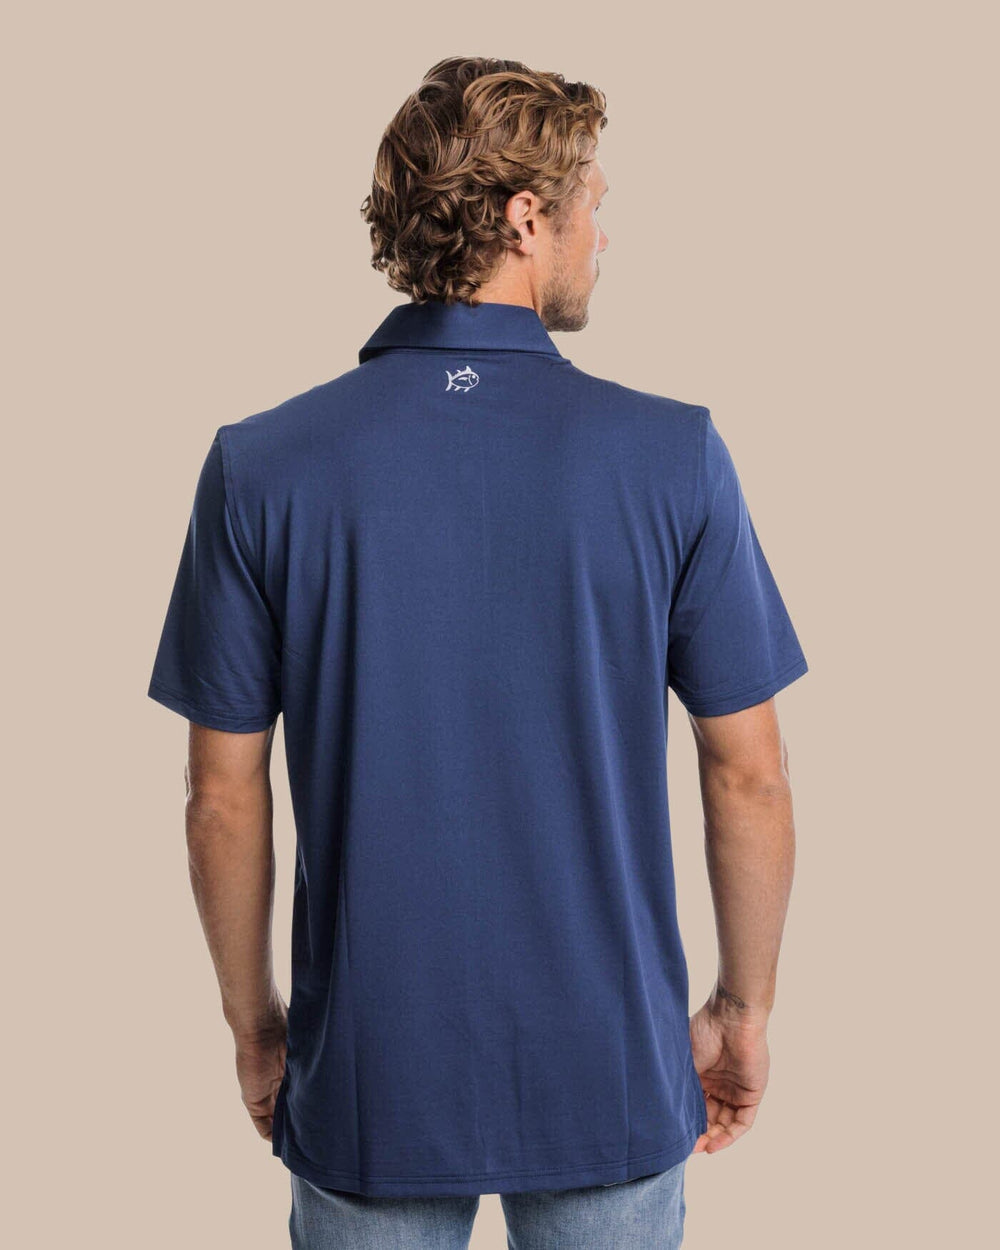 The back view of the Southern Tide Brenton Chest Stripe Performance Polo by Southern Tide - Navy